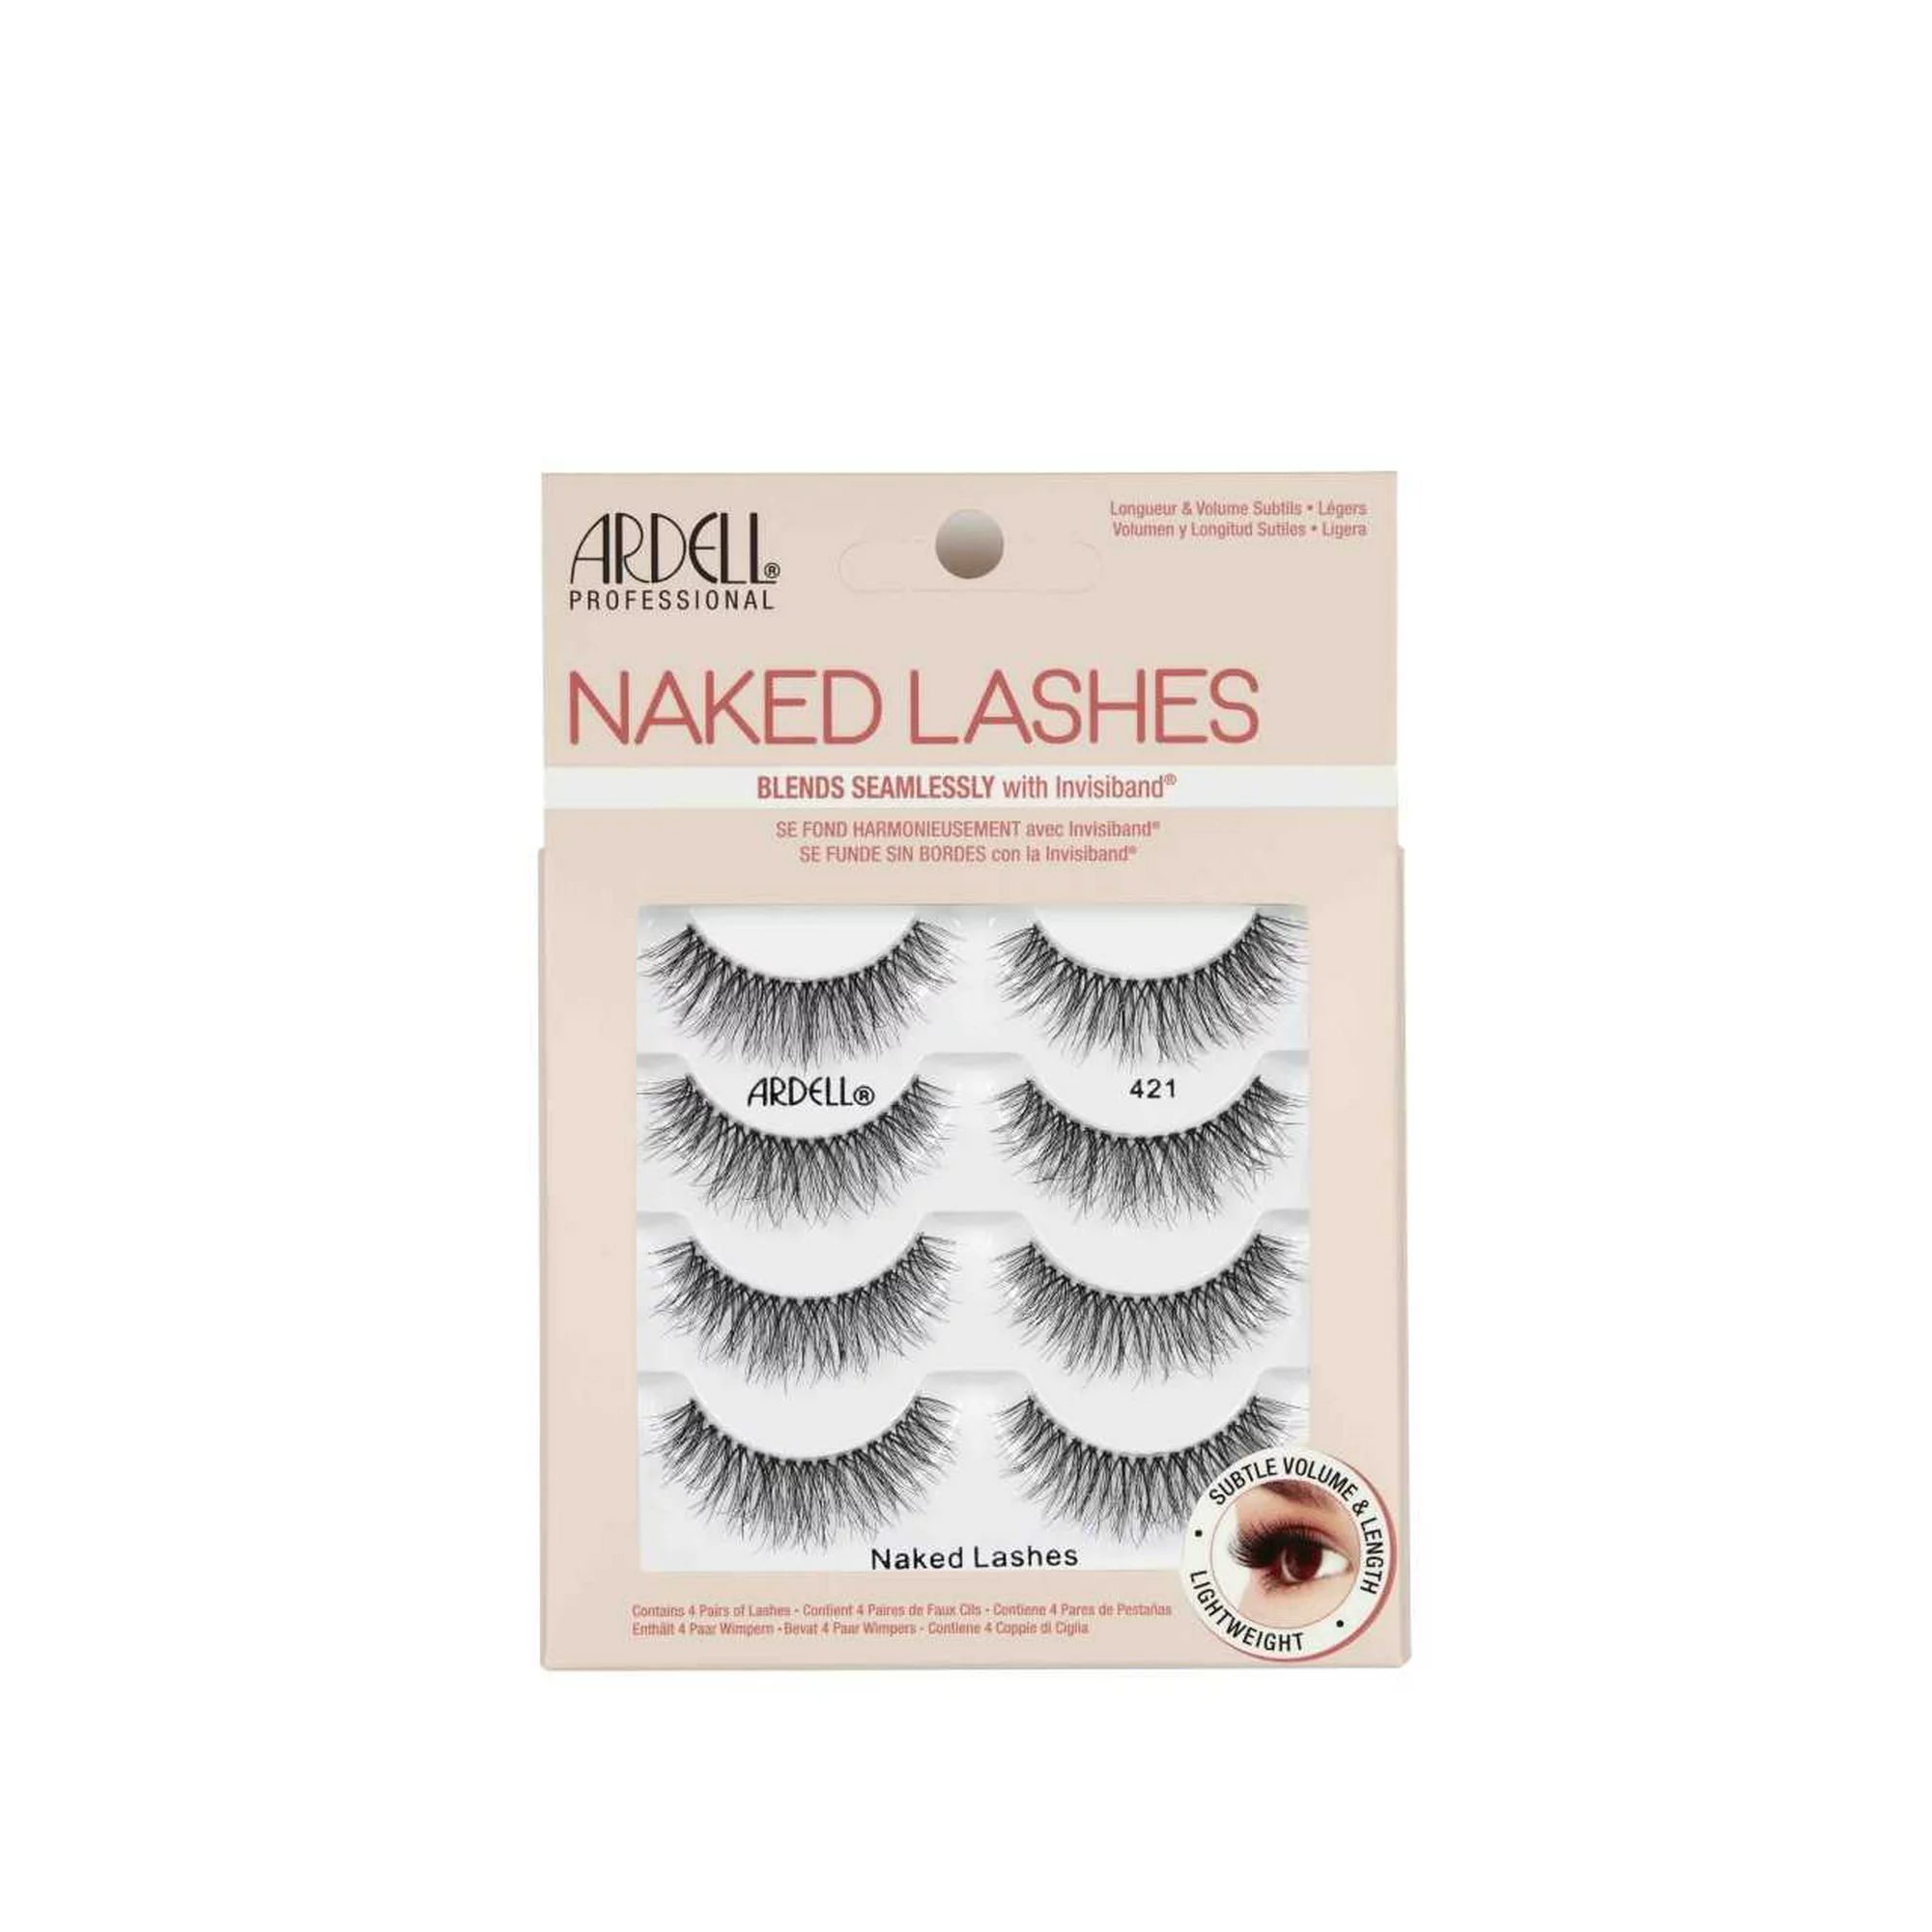 Ardell Professional Naked Lashes, 421, 4 Pairs | Walmart (US)